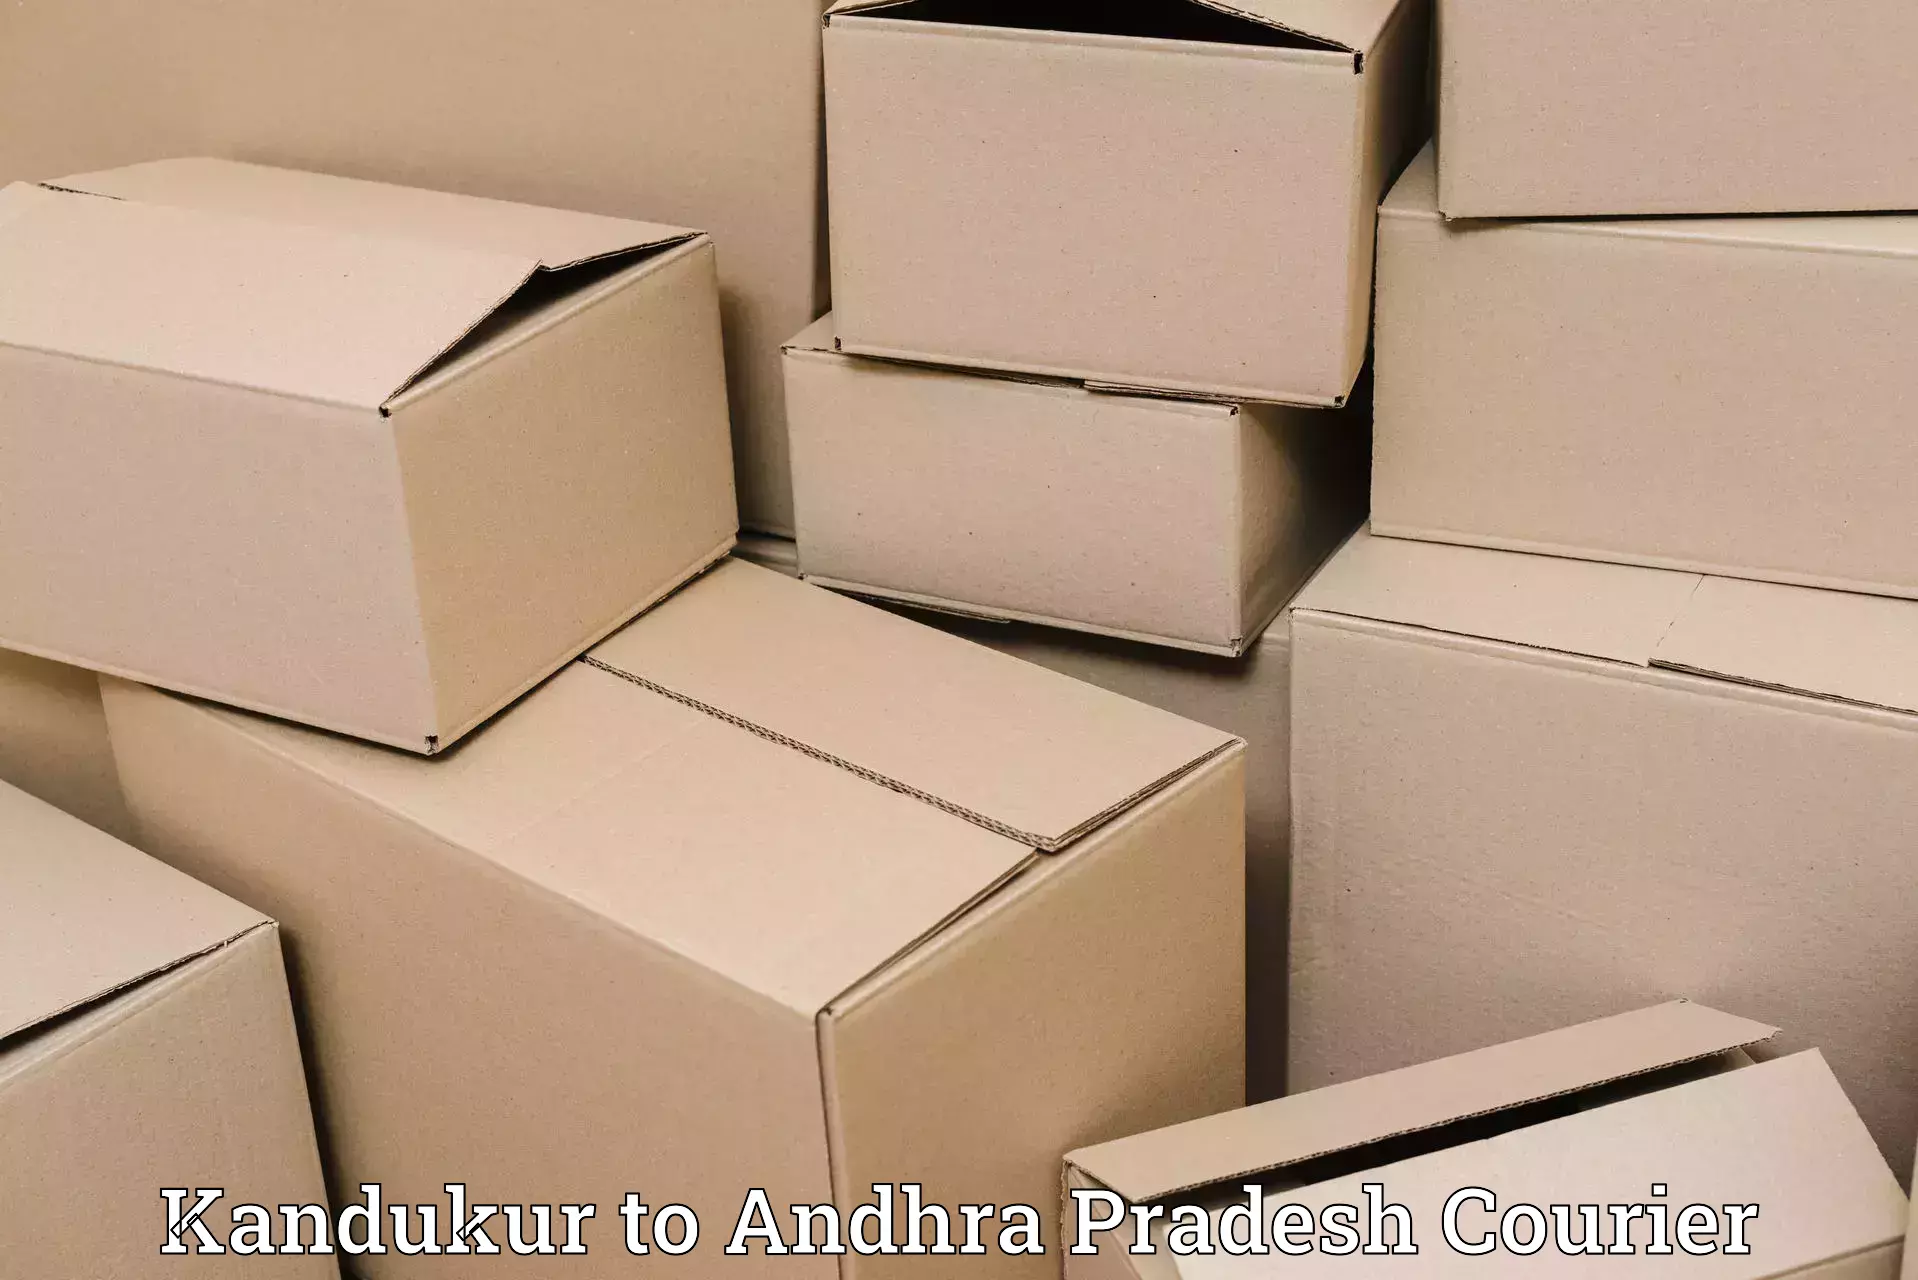 Express package delivery in Kandukur to East Godavari